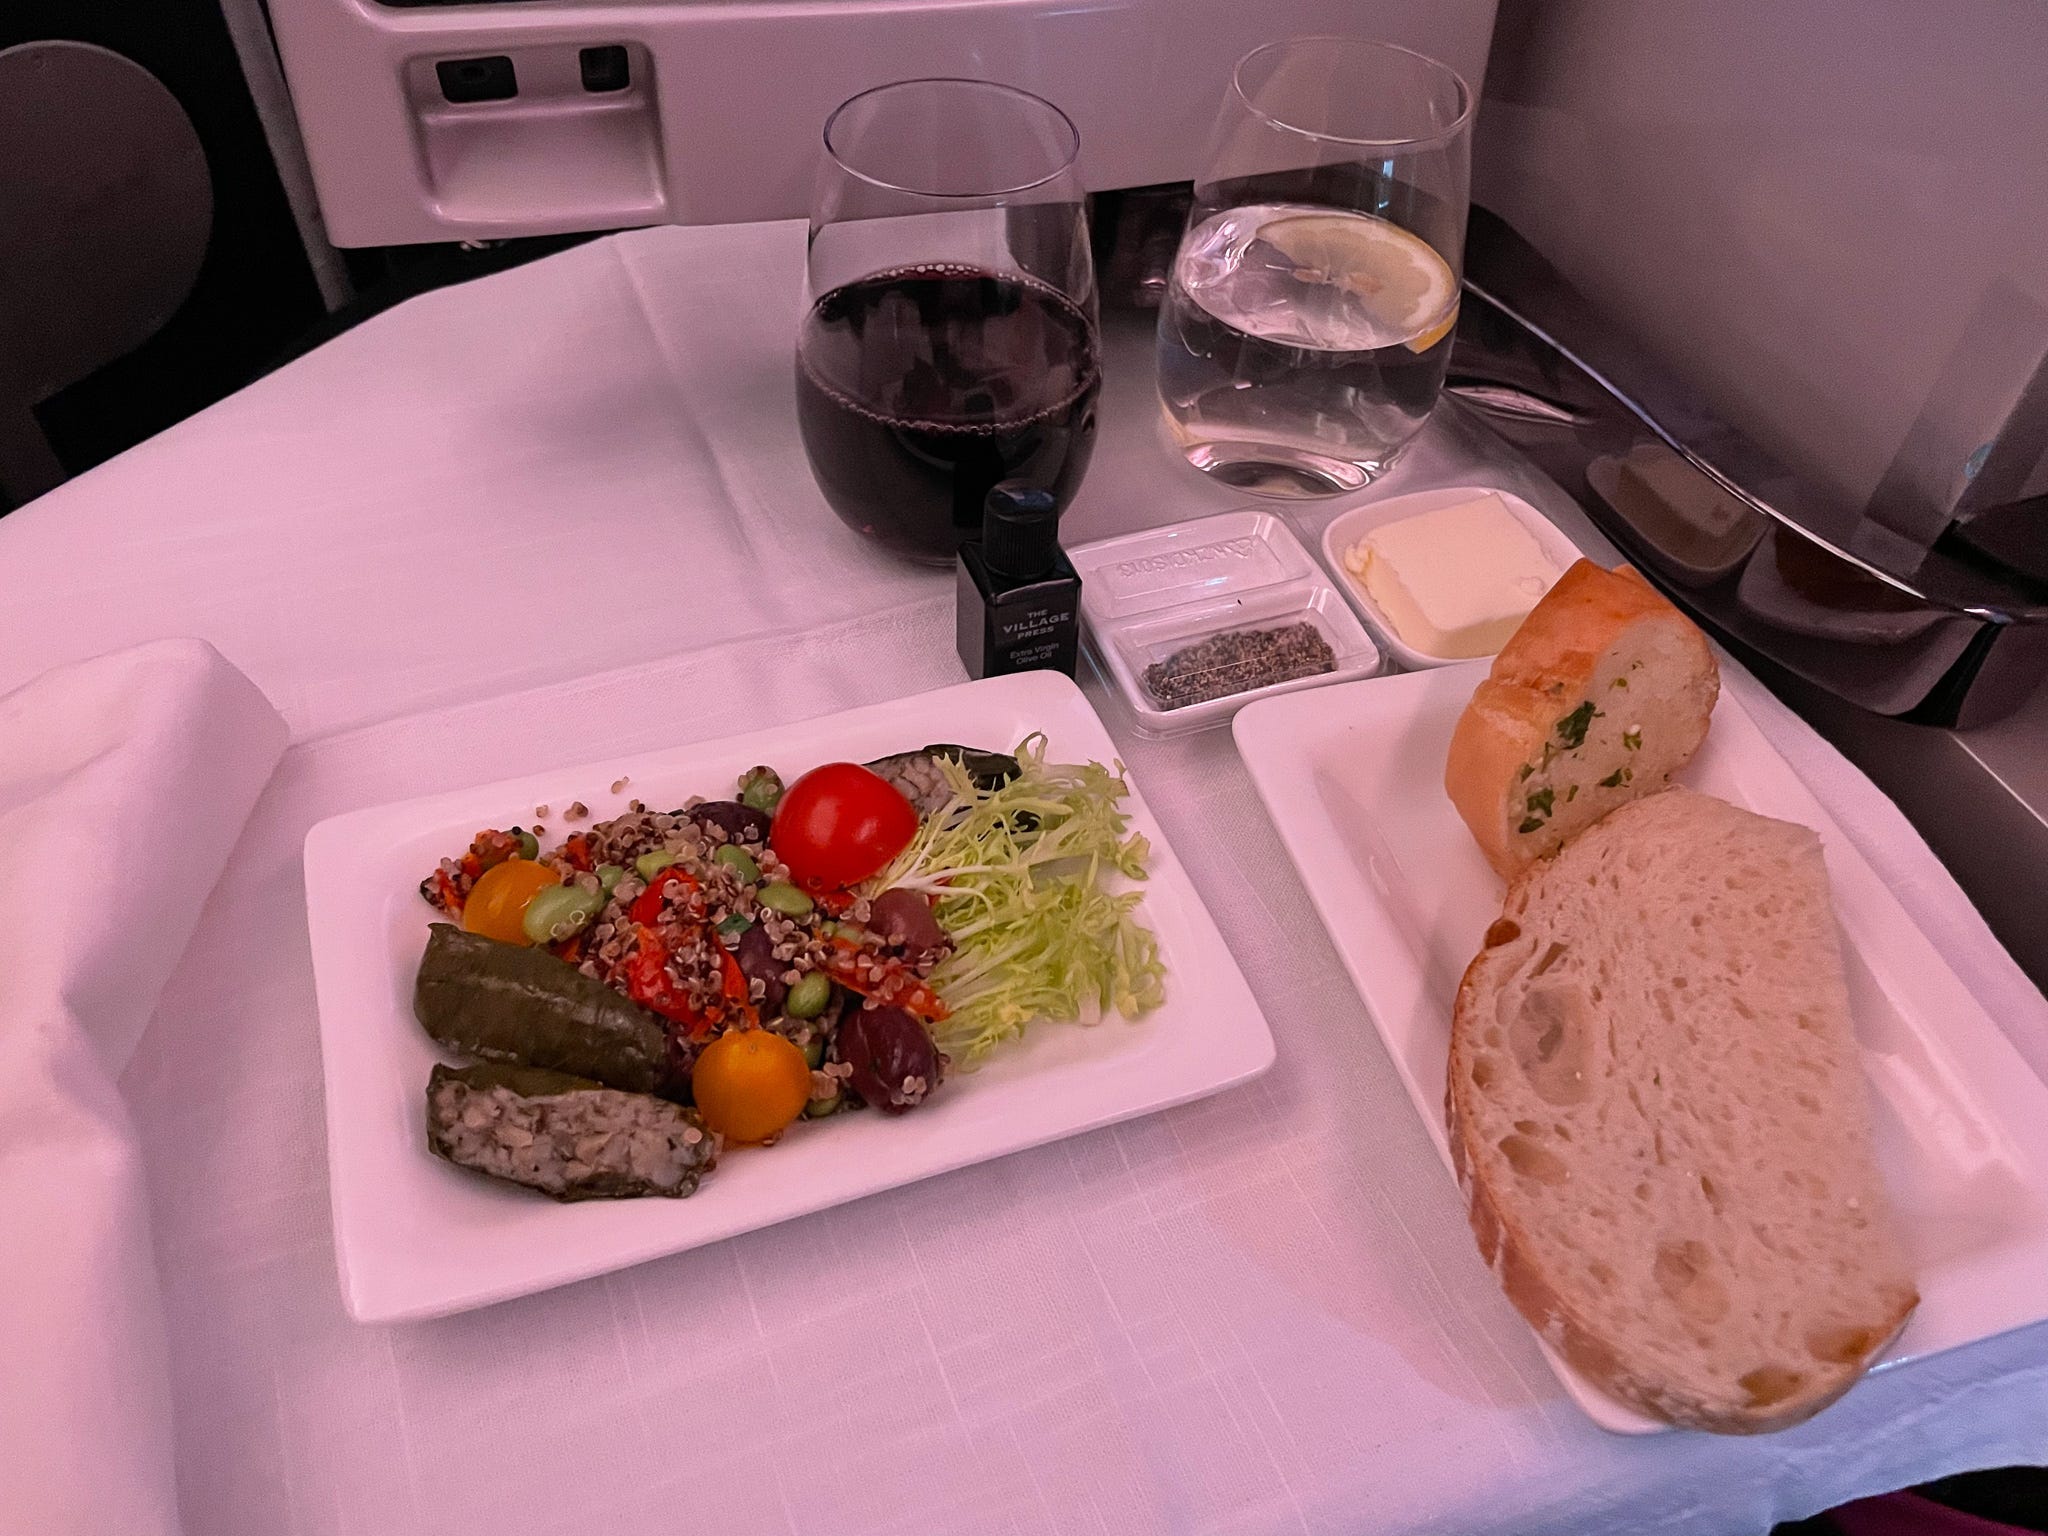 <p>When it was time to eat dinner, my first meal of the flight, a menu was provided at my seat outlining options for the three-course meal inspired by New Zealand ingredients. Beetroot-cured salmon, poached chicken, and chocolate truffle ice cream were listed on the menu. </p><p>The flight attendants kicked off dinner service by placing a cloth napkin across my tray table and laying down a set of metal silverware. I quickly realized that this meal was going to be nicer than any airline meal I've ever had.</p><p>On previous long-haul flights, as a vegetarian, I have been given one option handed to me on a tray. The meal was typically packaged and served with plastic cutlery.</p><p>So the silverware at my seat already established a drastic difference. Next, I was offered butter, olive oil, and salt and pepper. Following the condiments, the flight attendants walked around with a basket of warm sourdough and garlic bread. </p><p>Then, the first course arrived. I opted for a pescetarian meal, so I was served stuffed olive leaves. This was followed by a main course of Alaskan cod with saffron sauce, and finished with a chocolate tart for dessert. </p><p>The meal was rich and filling. From its appearance and taste, I thought the meal could easily be served in a nice restaurant rather than an airplane cabin.</p>